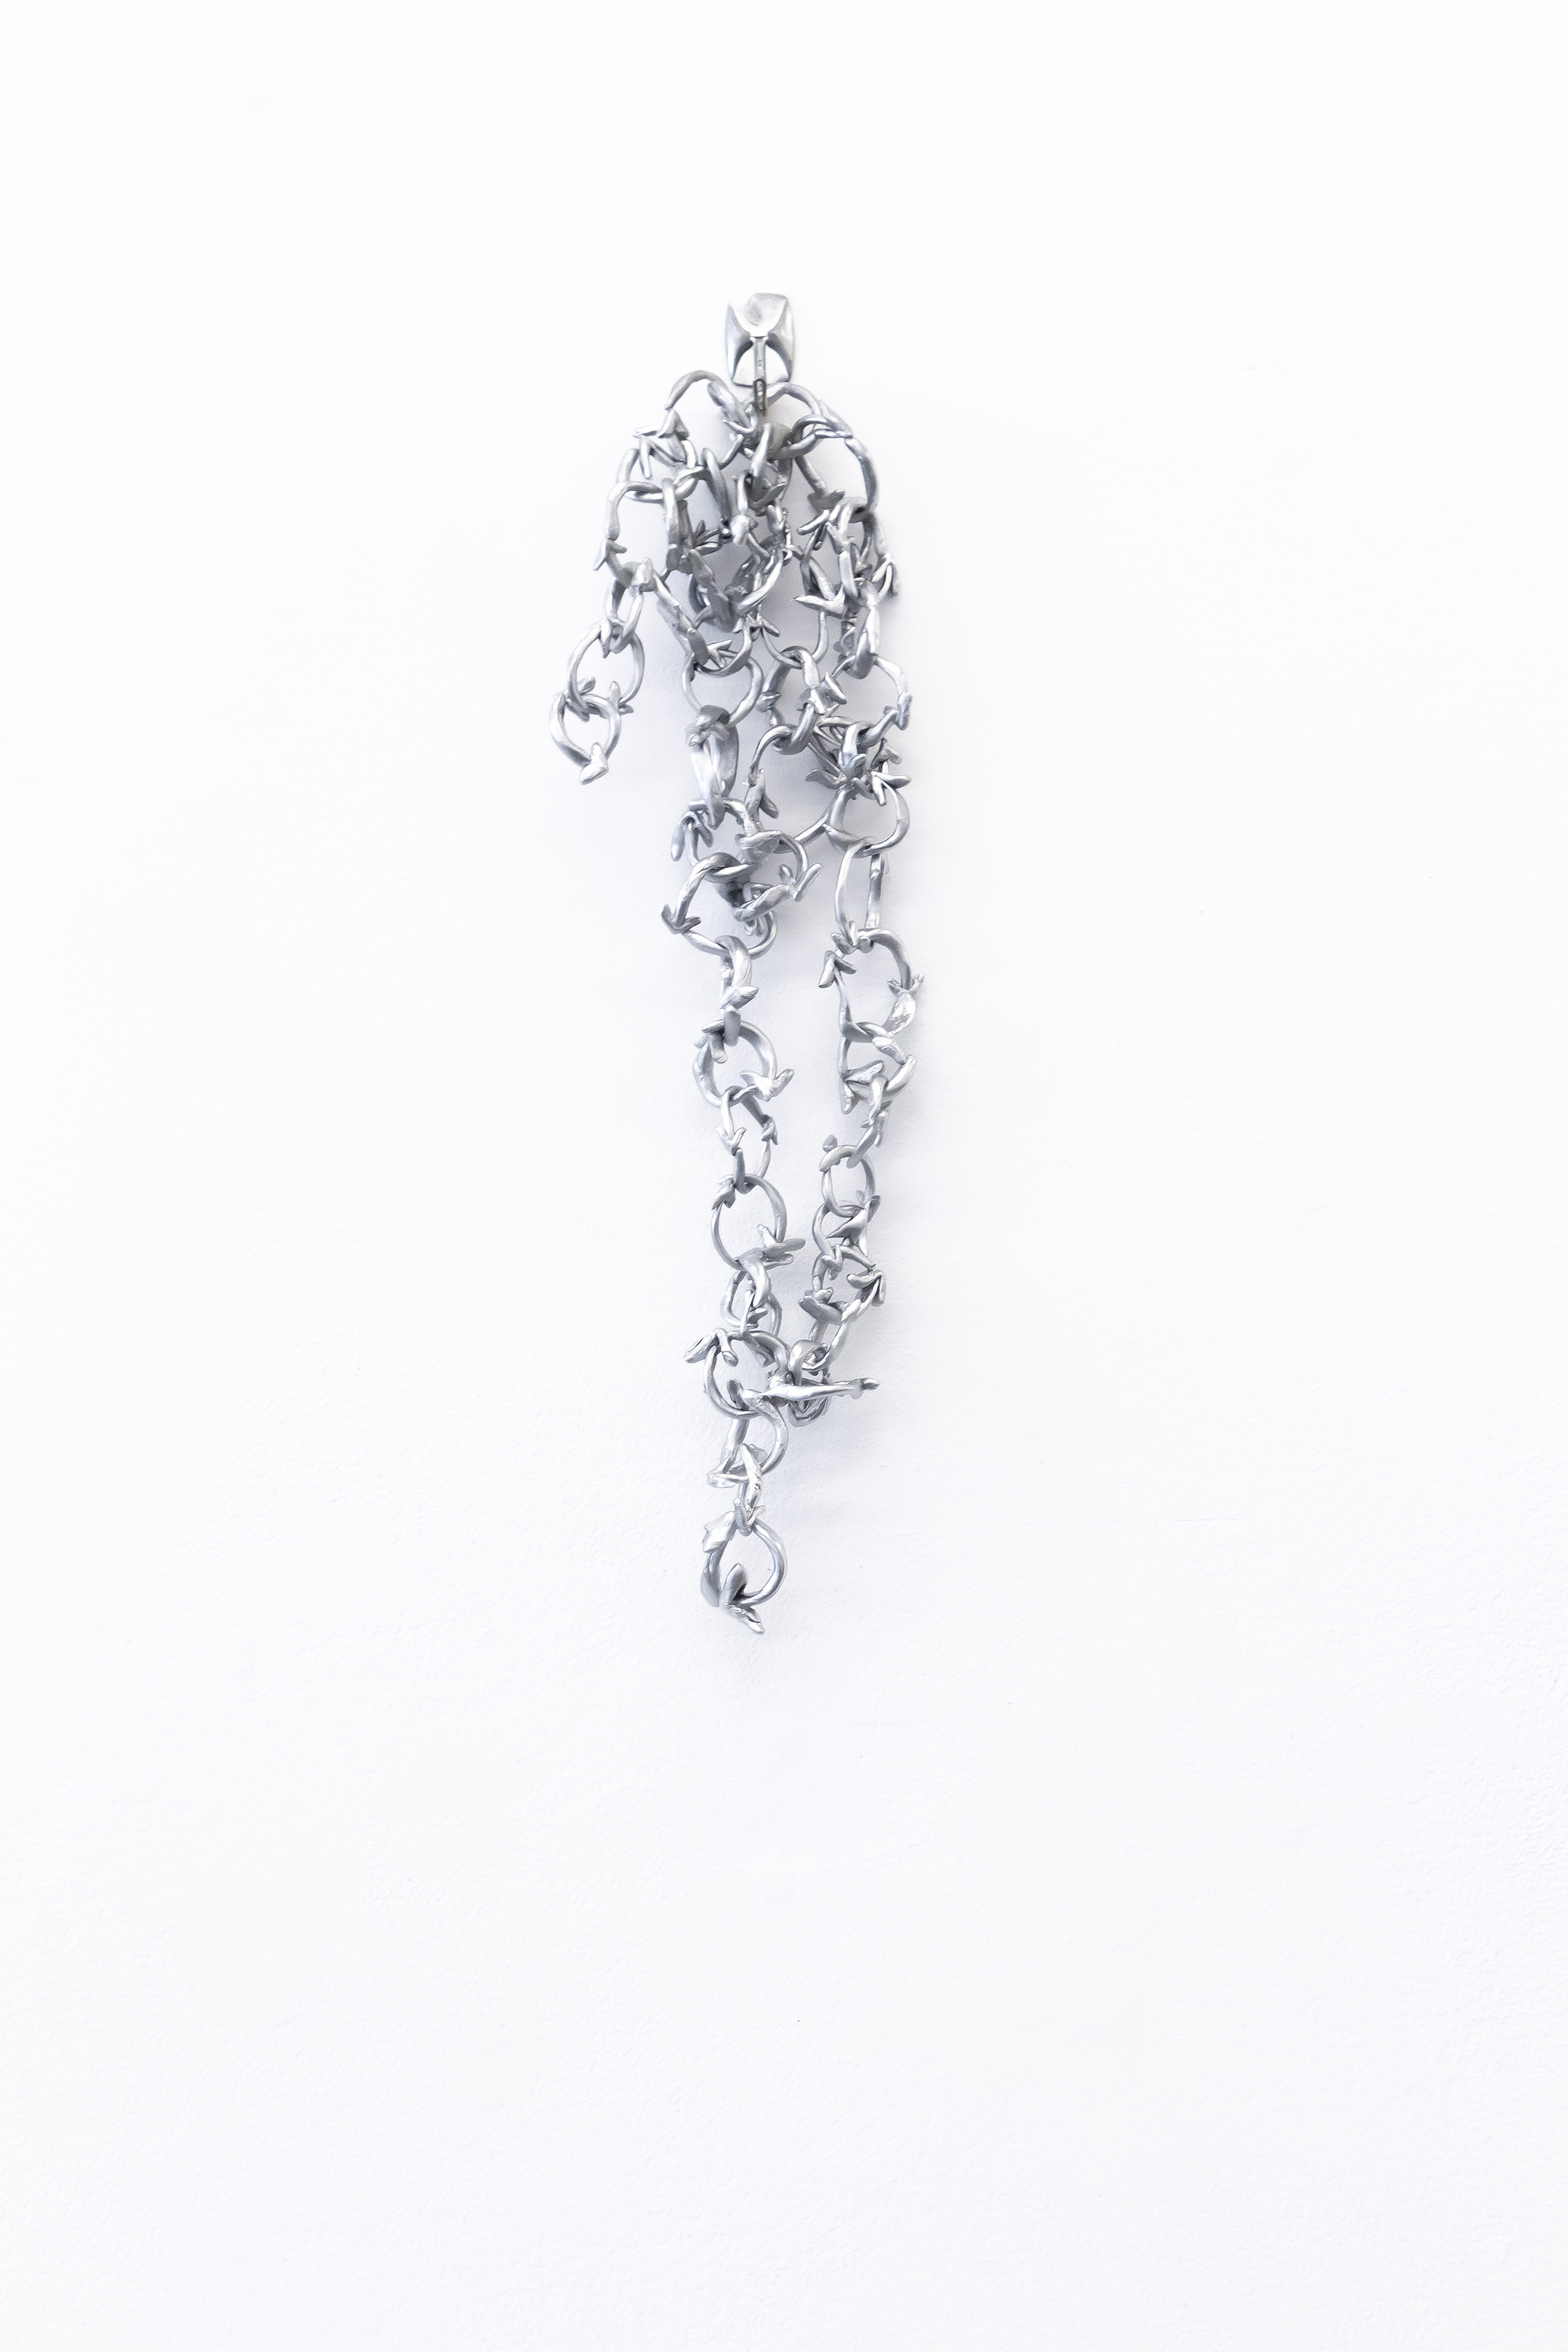 rererererere...rere.ico, object: thermoplastic, chrome paint, 40x13x1 cm, 2023.